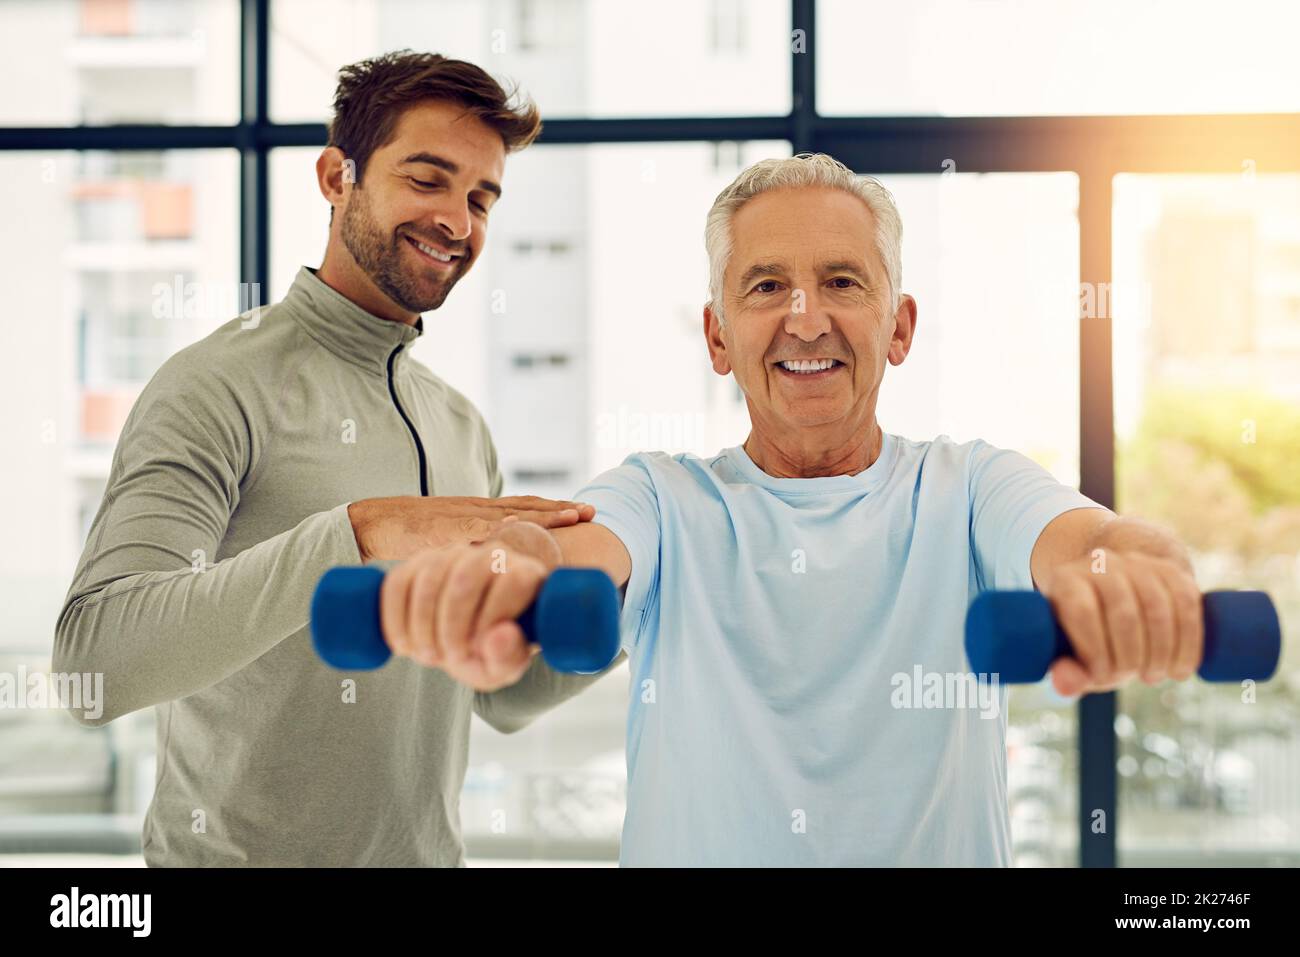 Seniors can be strong too. Portrait of a friendly physiotherapist helping his senior patient work out with weights. Stock Photo